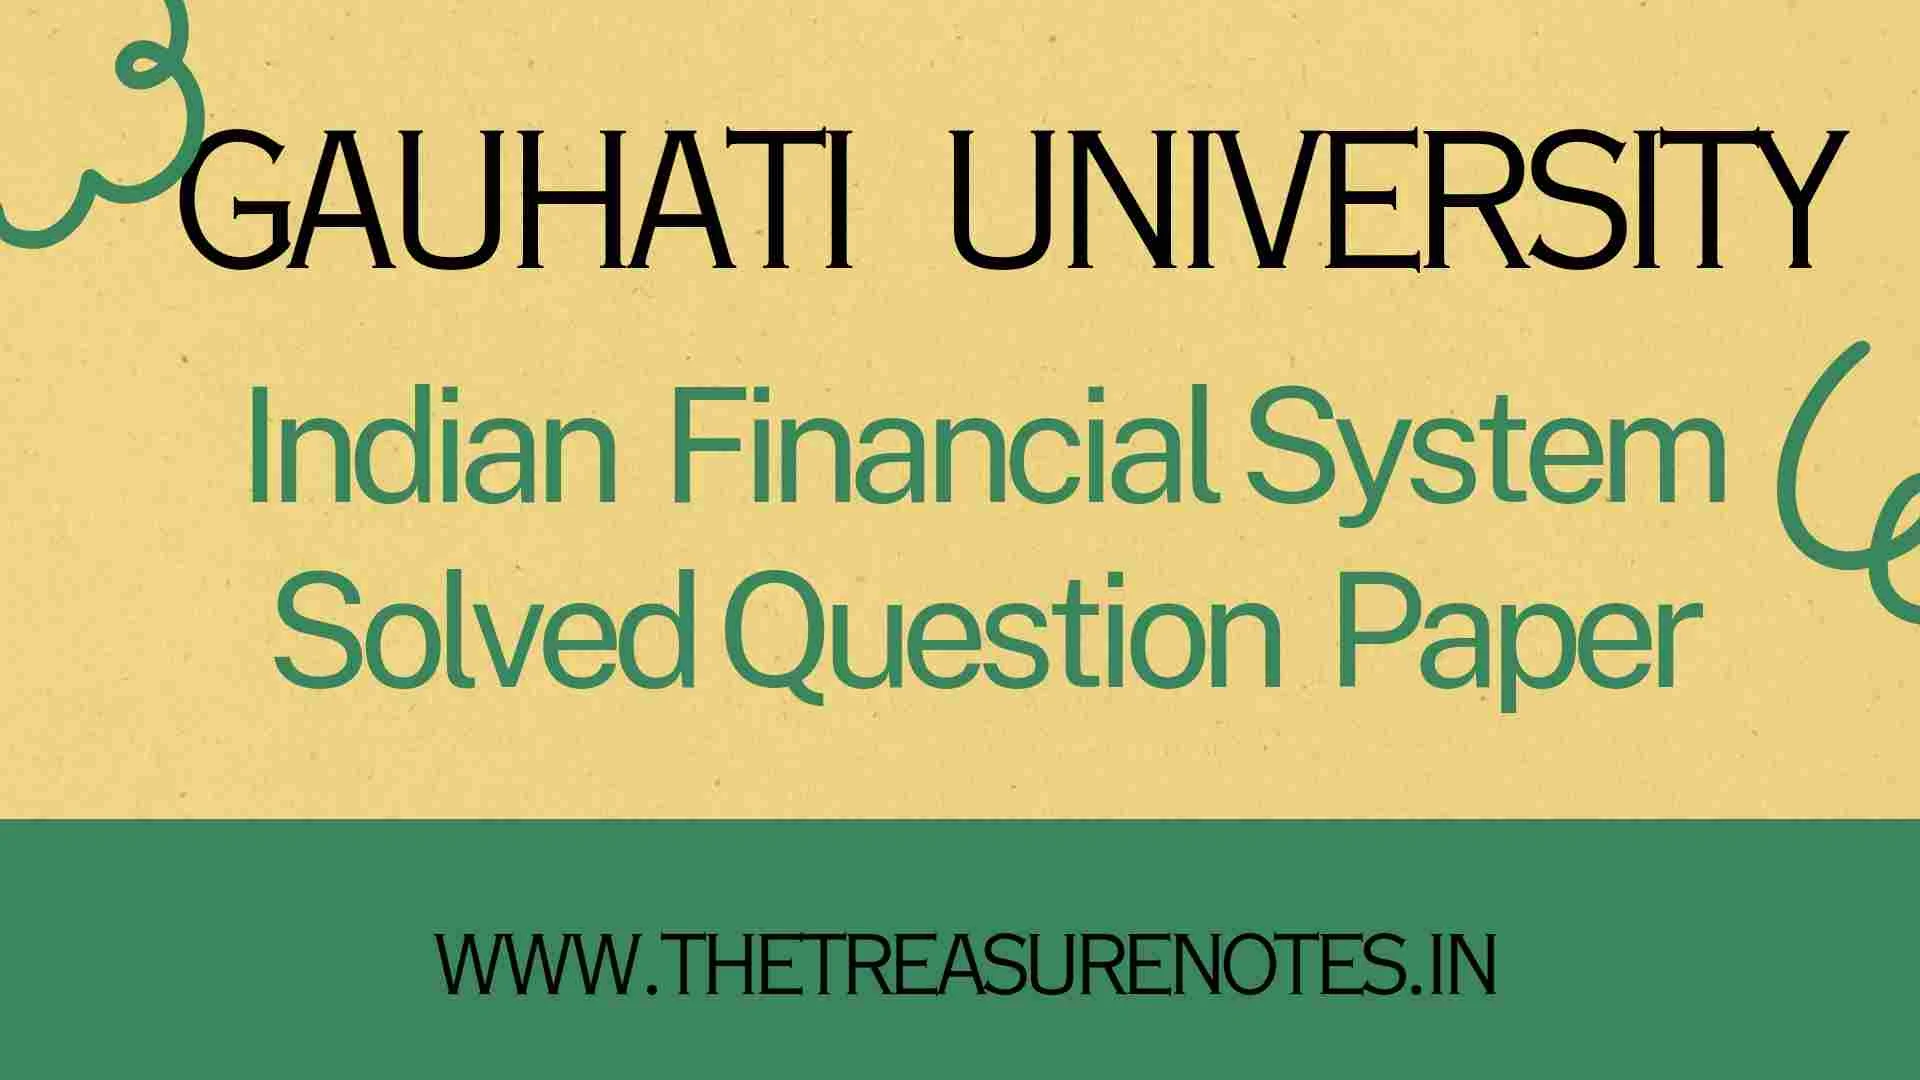 Indian Financial System Solved Question paper 2021 GU , Gauhati University Indian Financial System Solved Question paper pdf download, Indian financial system question paper 2021 Gauhati University, Gauhati University BCom 5th sem solved paper pdf , GU Bcom 5th sem